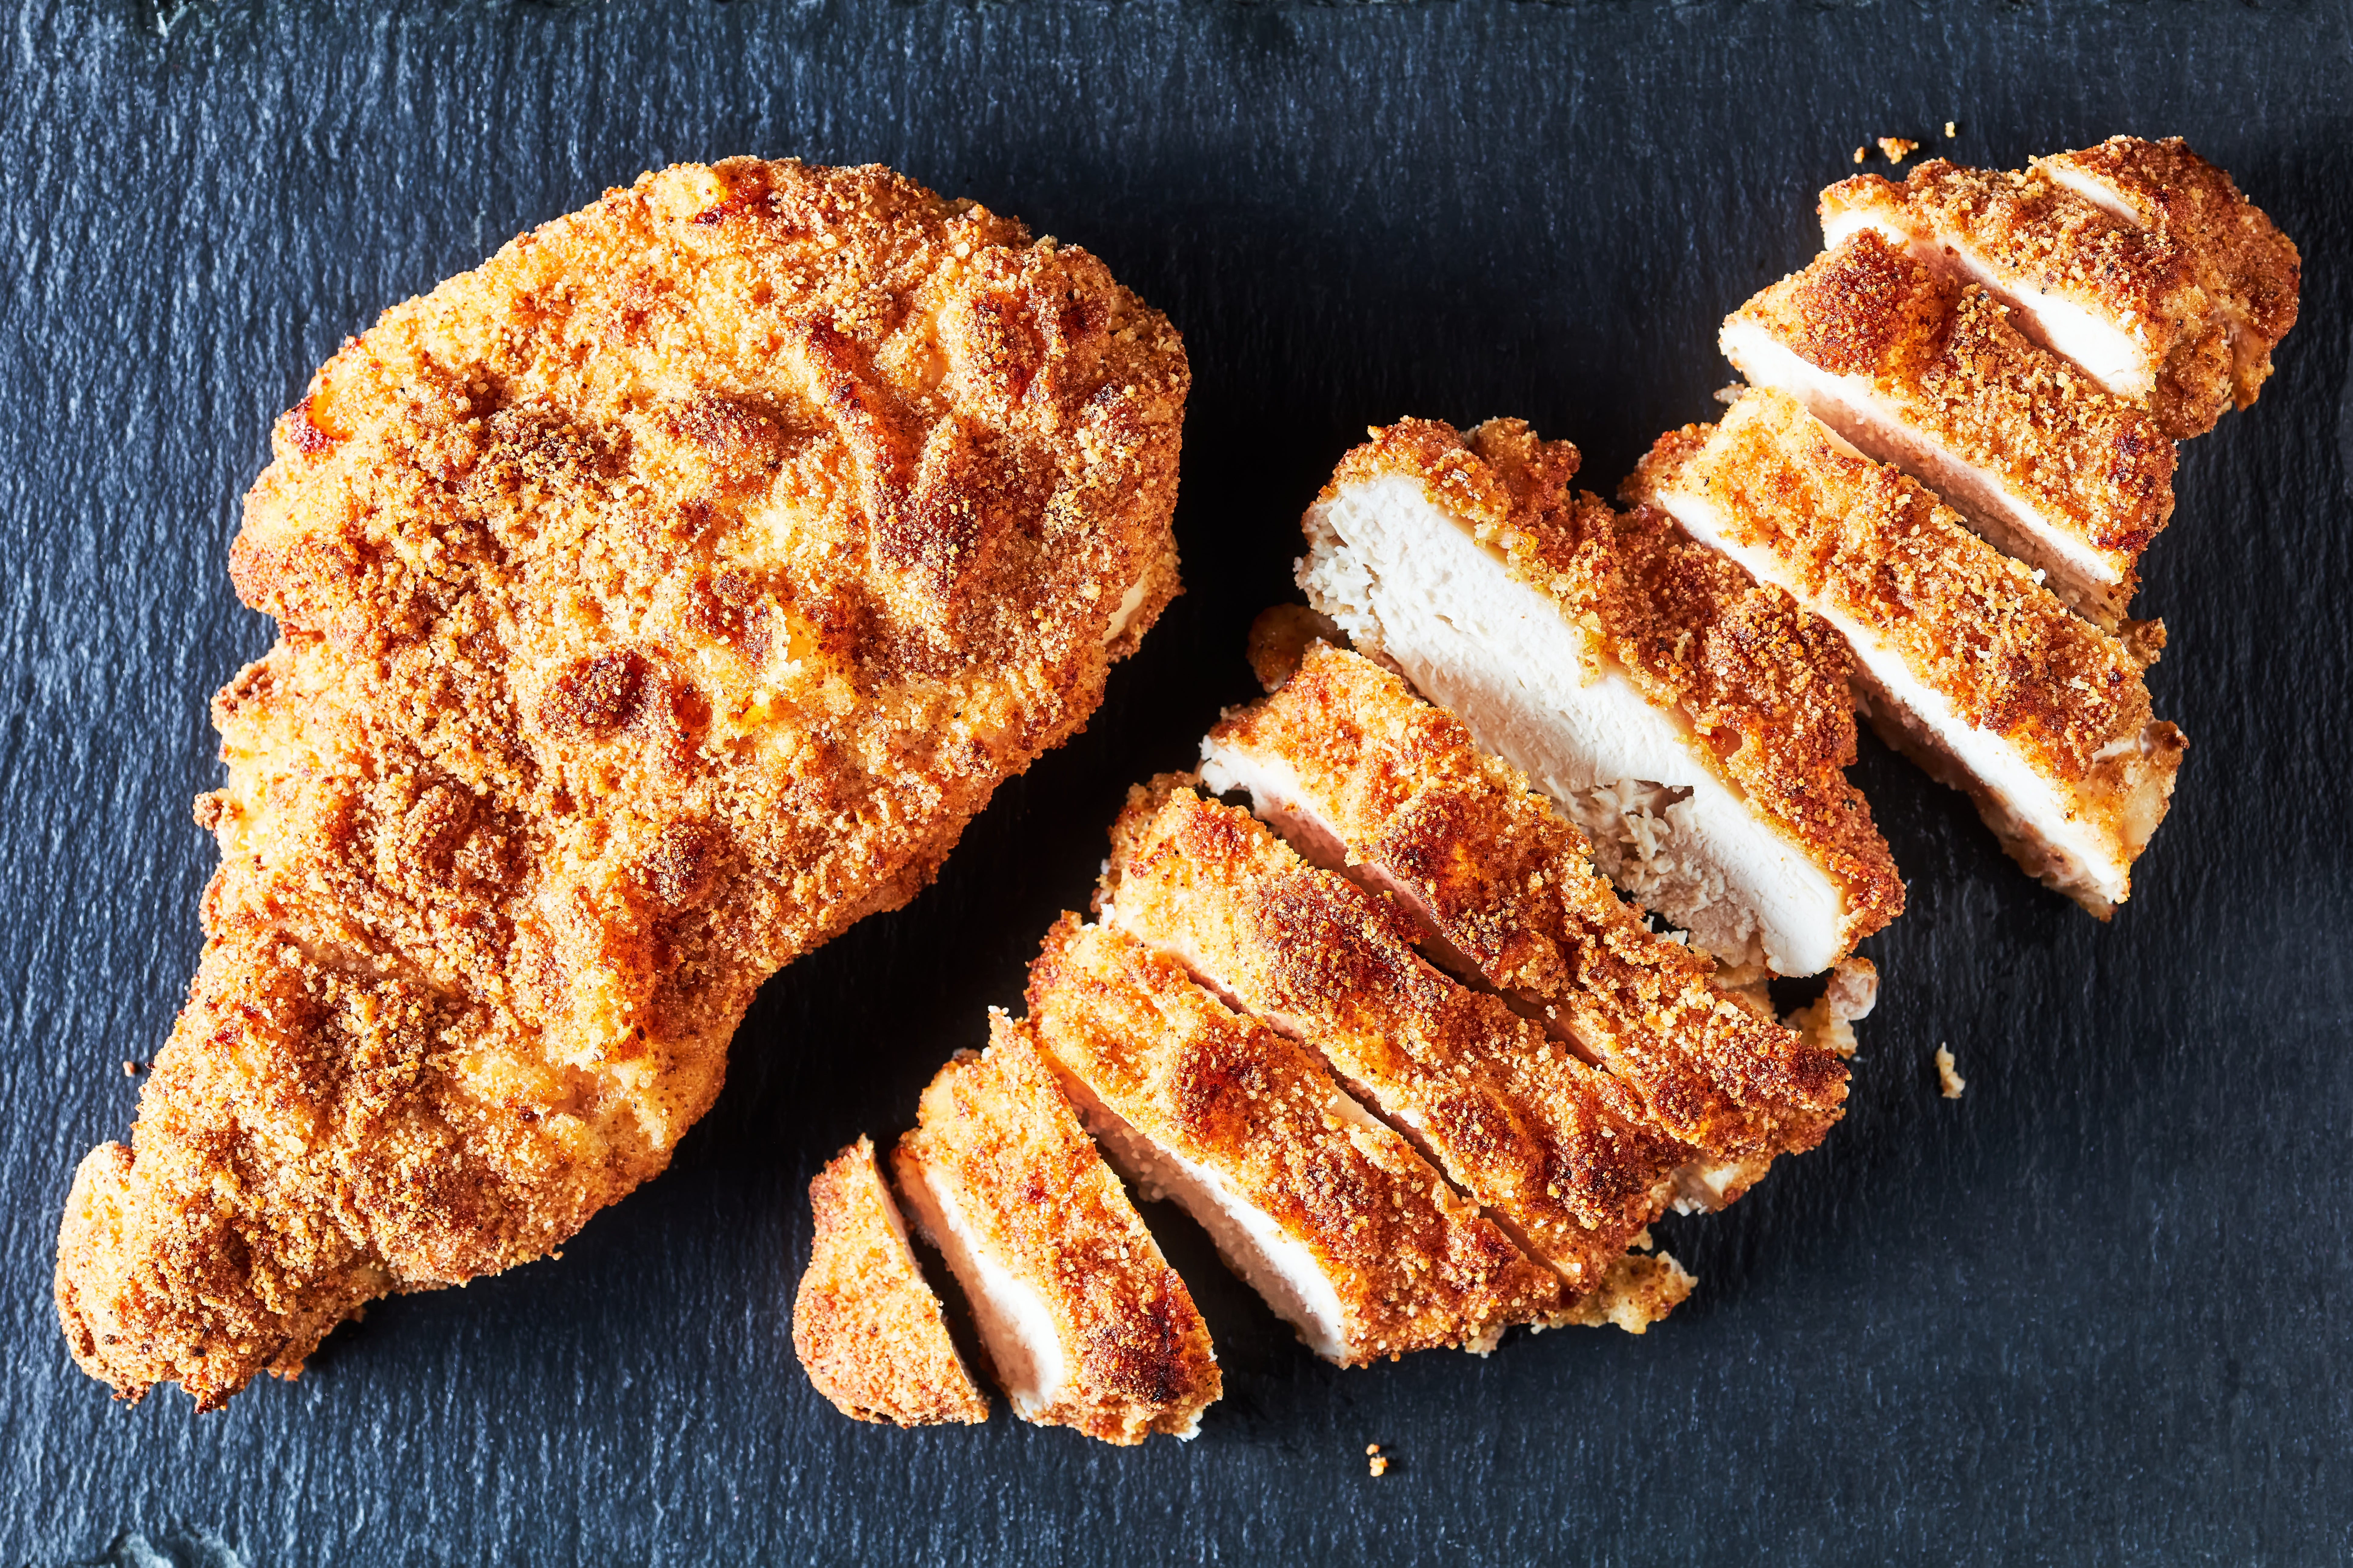 These cheesy, crispy chicken cutlets are as good as they sound